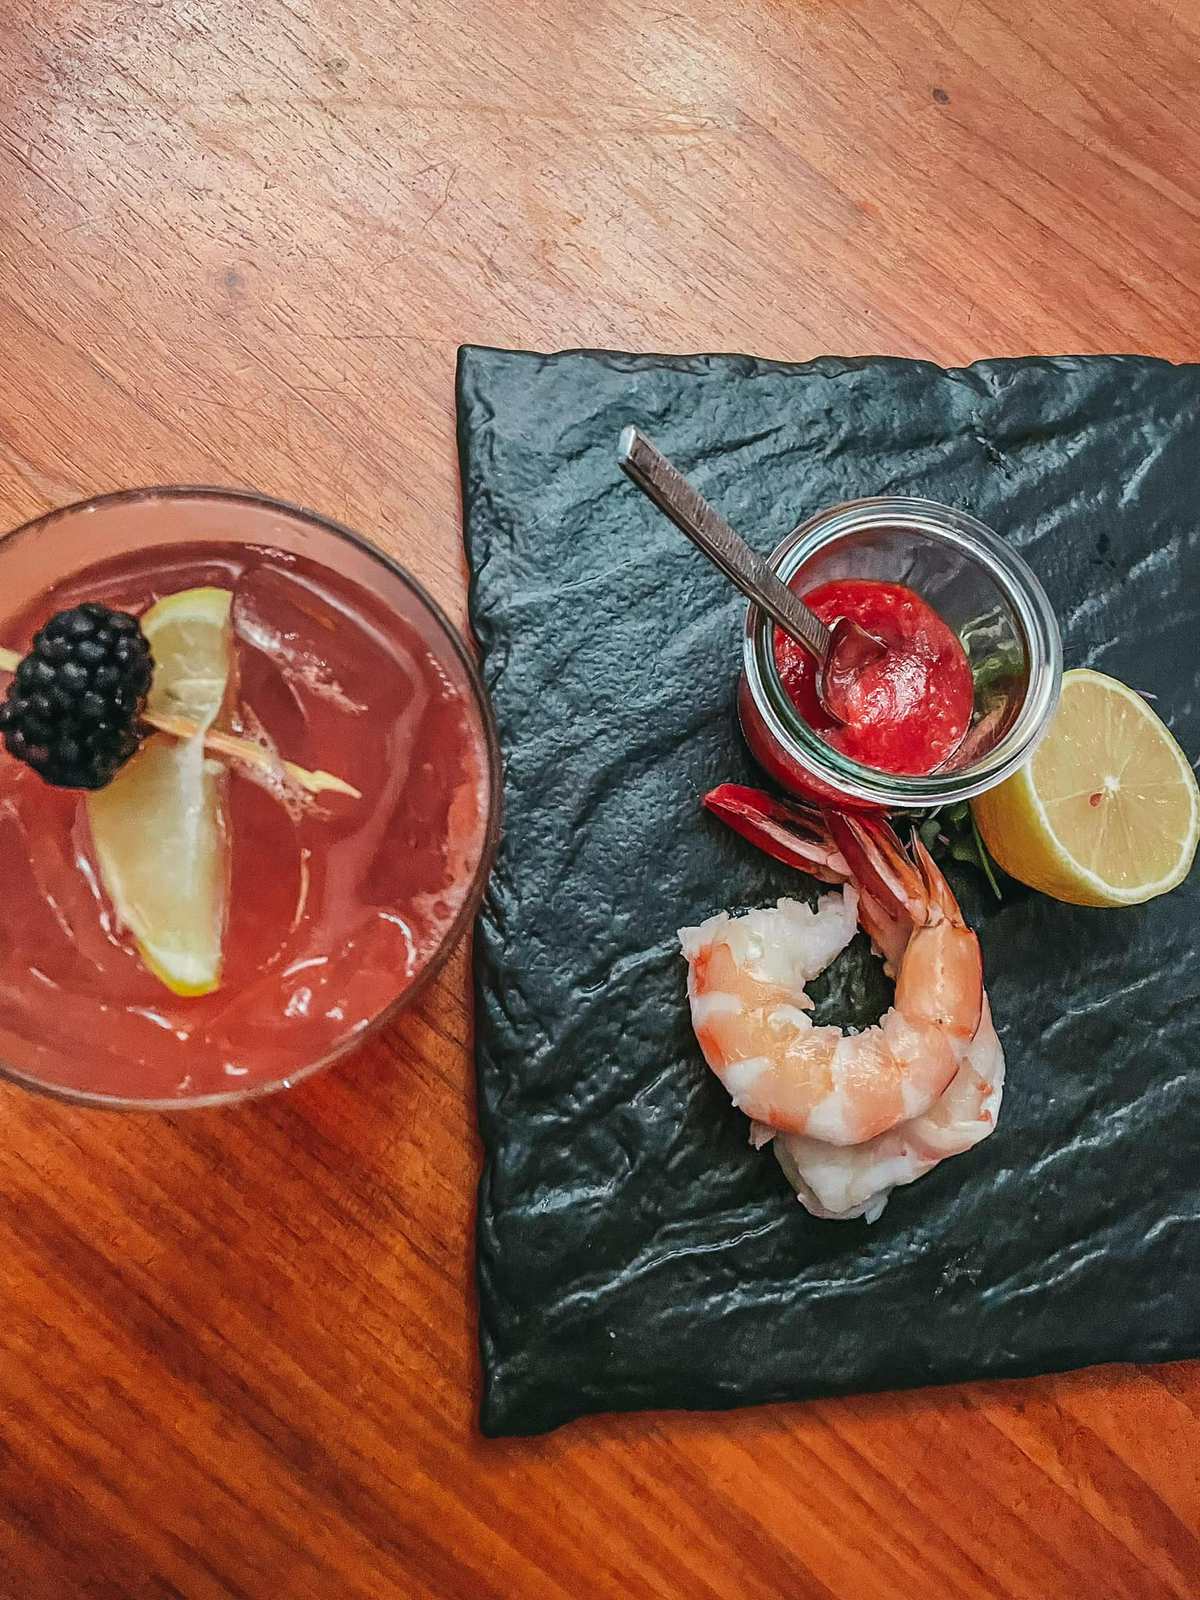 Cocktail and shrimp cocktail from Oystercatchers in Tampa